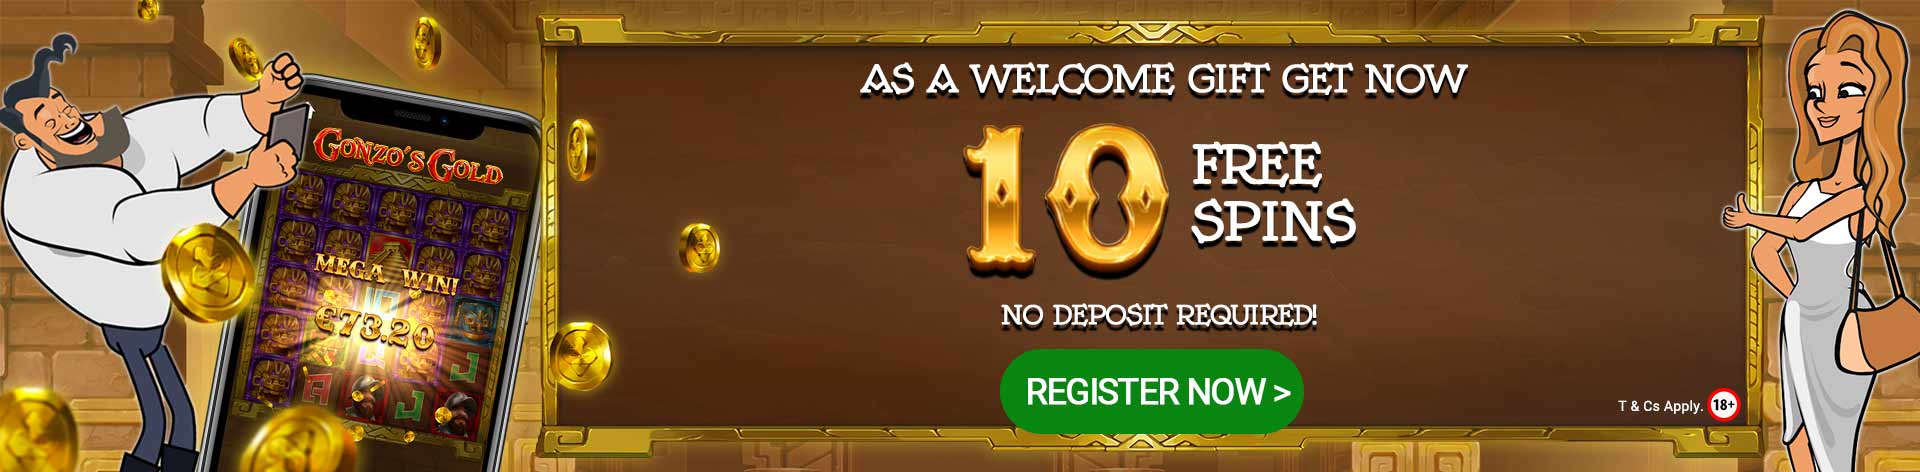 As a Welcome Gift get now 10 Free Spins. No deposit required!